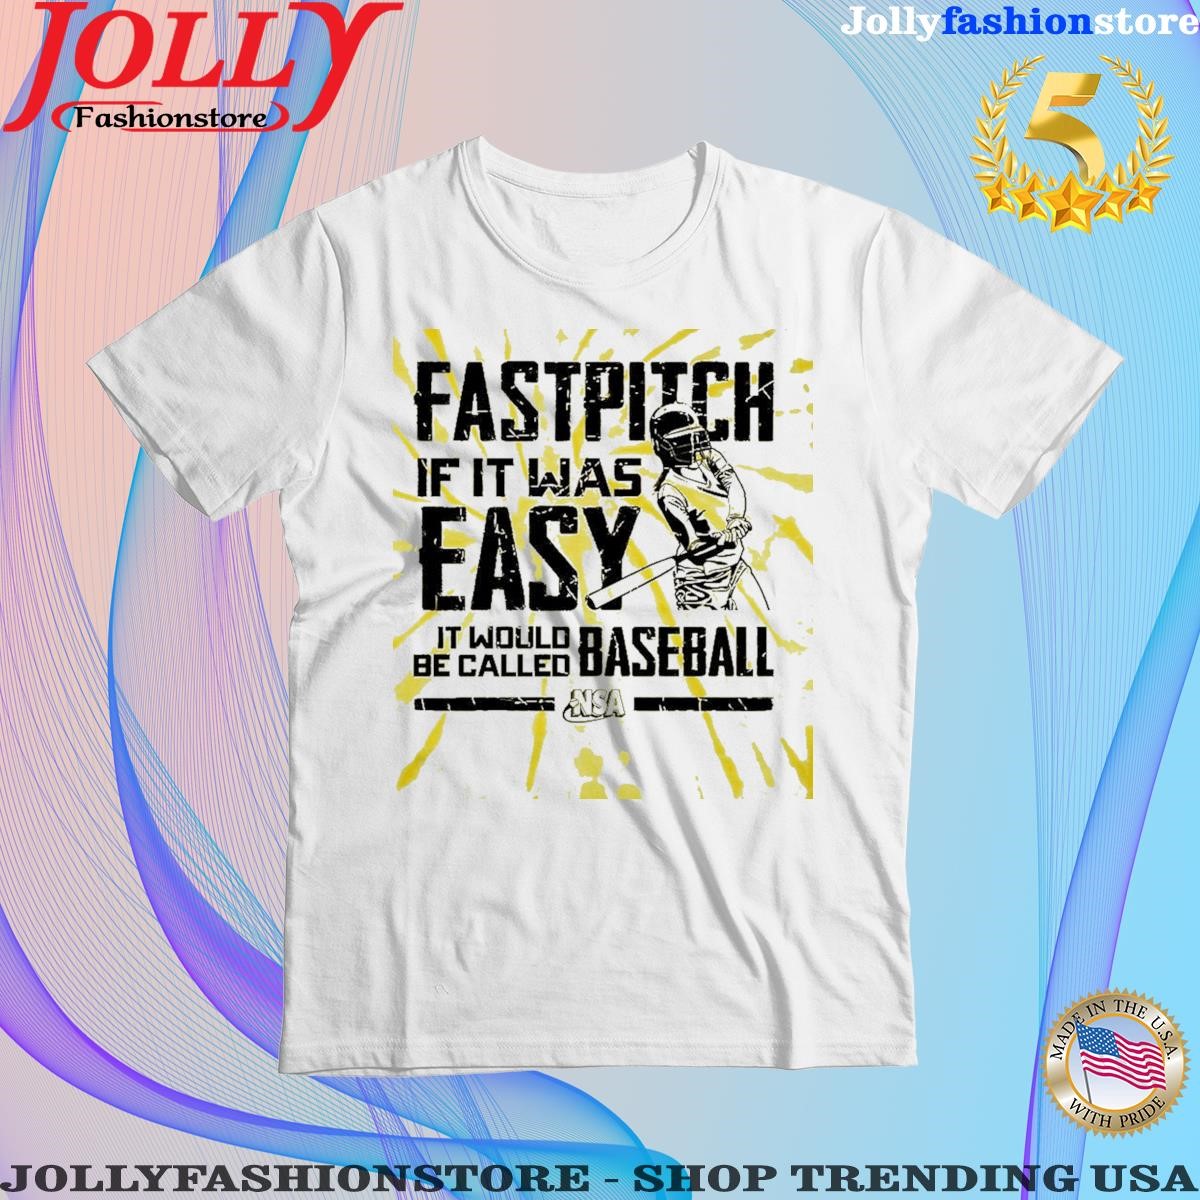 Nsa fastpitch if it was easy it'd be called baseball tie dye Shirt